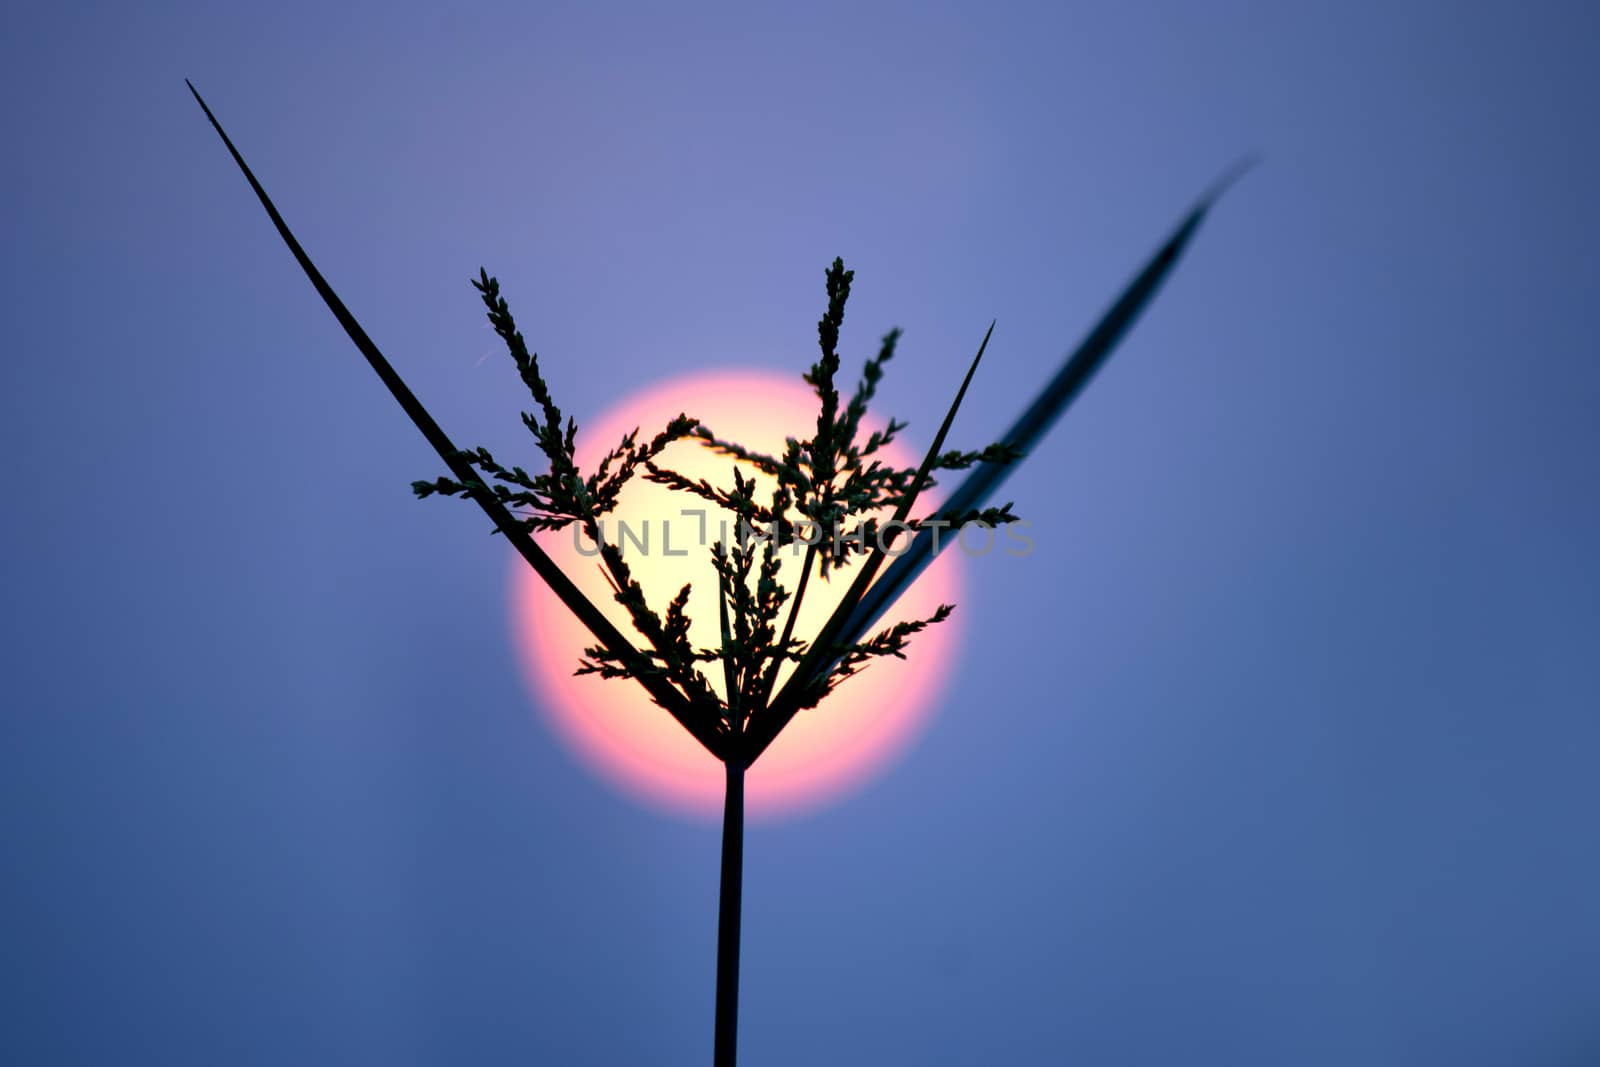 Silhouette flower at sunset